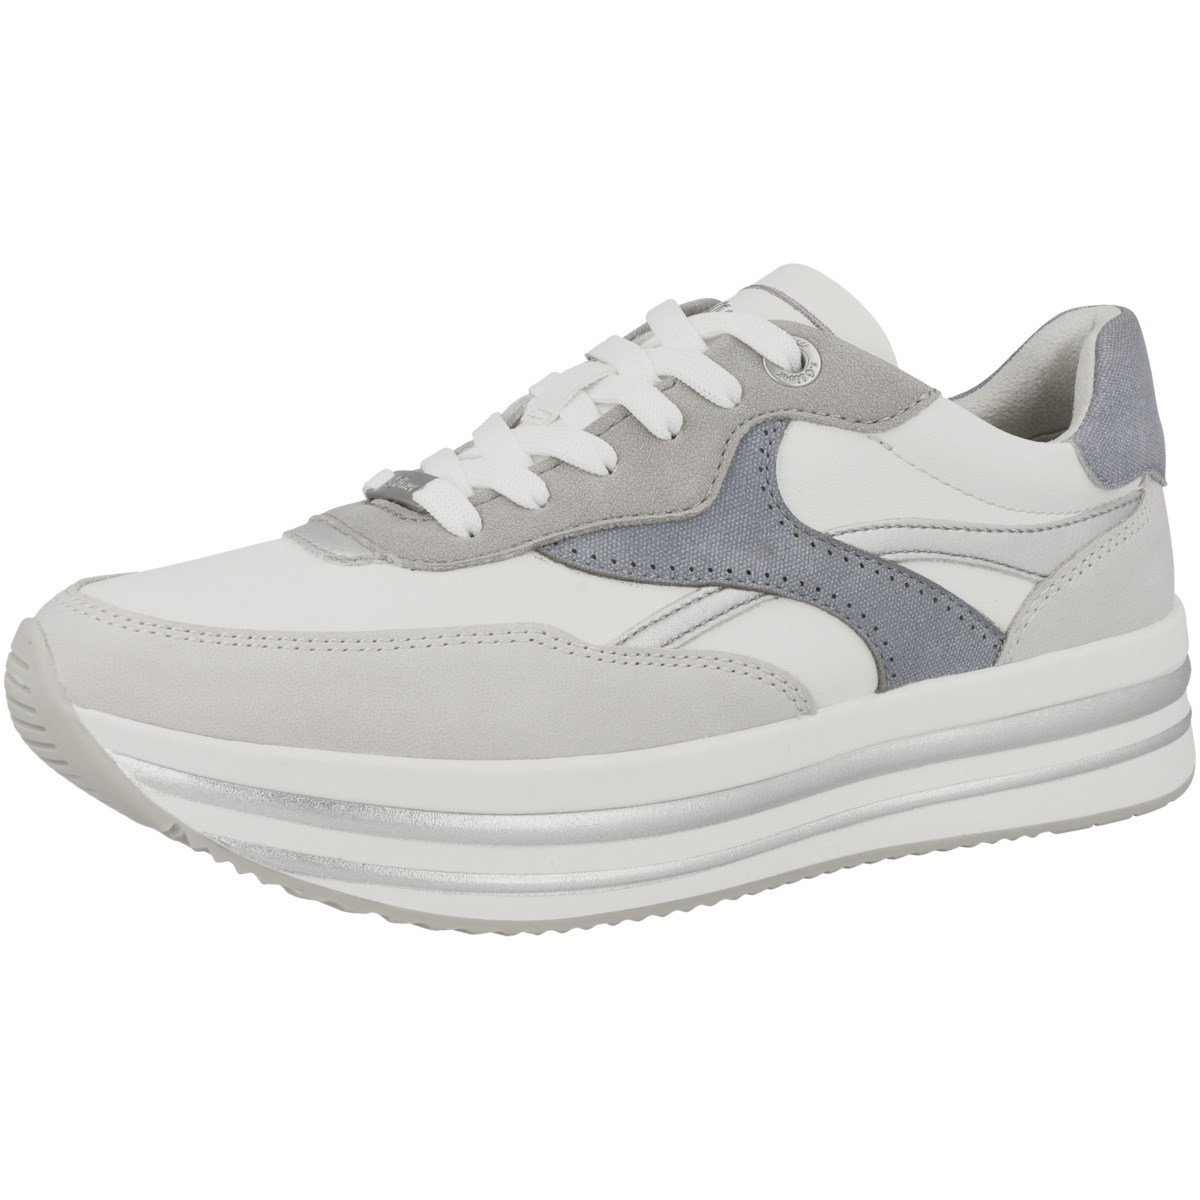 s.Oliver 5-23661-20 Sneaker low